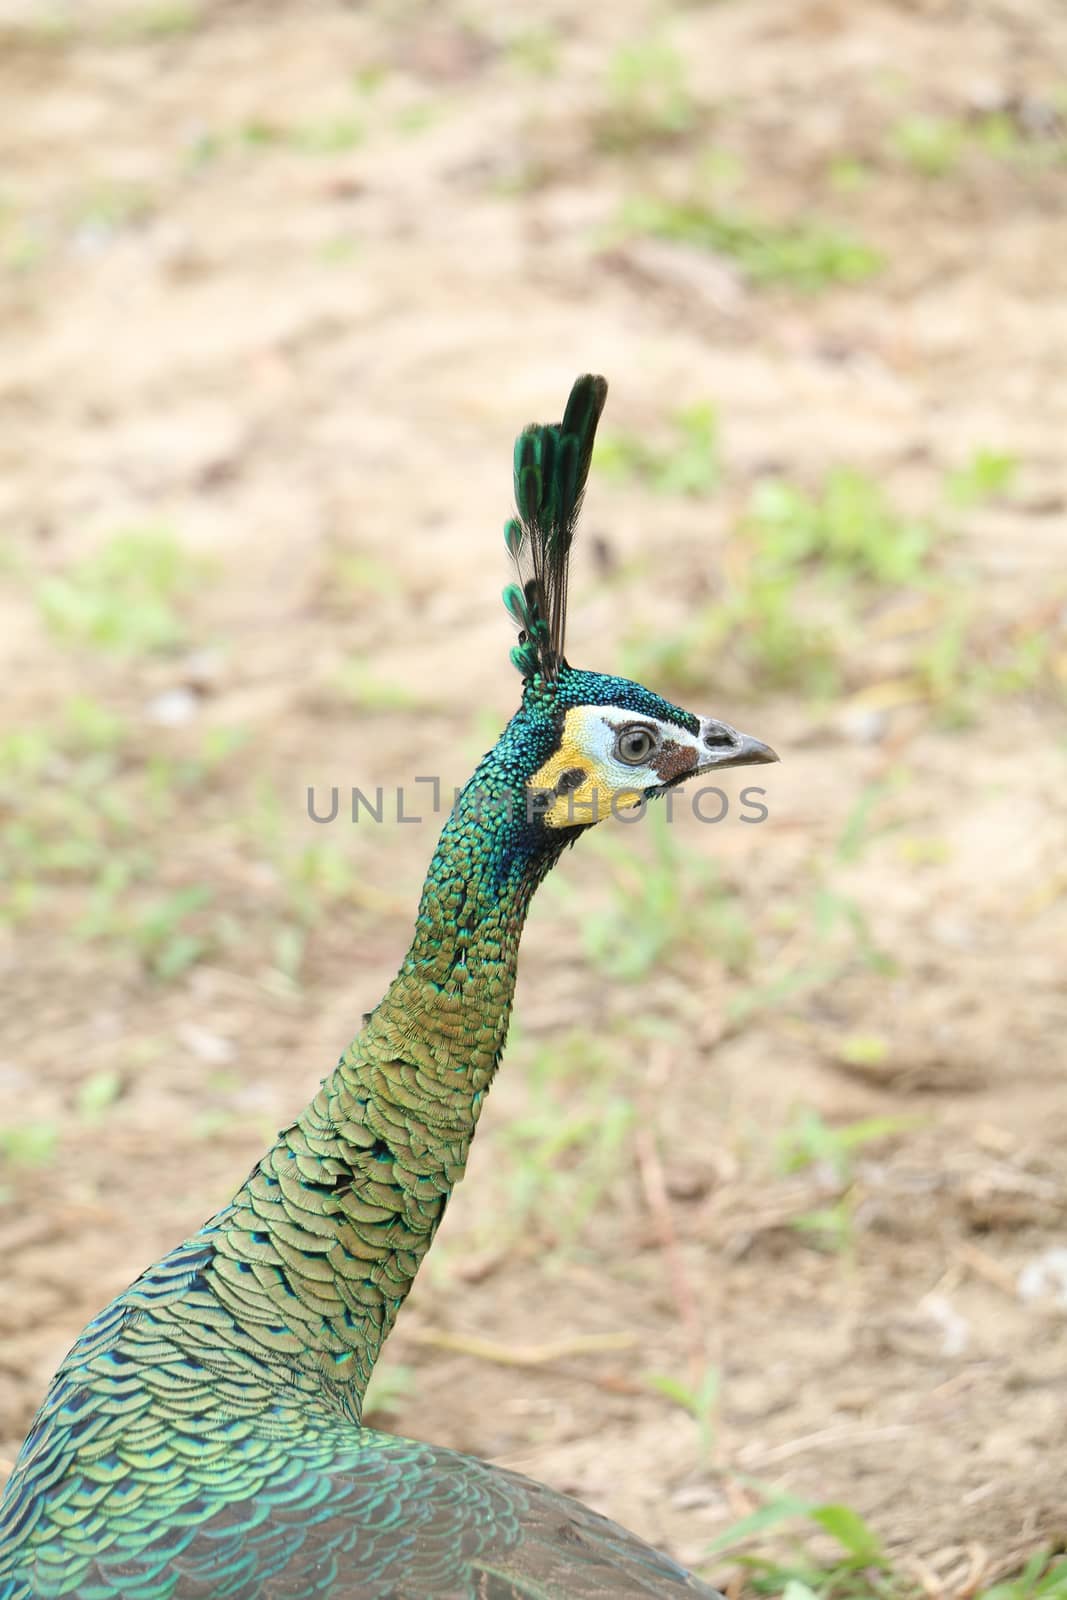 The green peafowl is walking for food on the ground by visanuwit